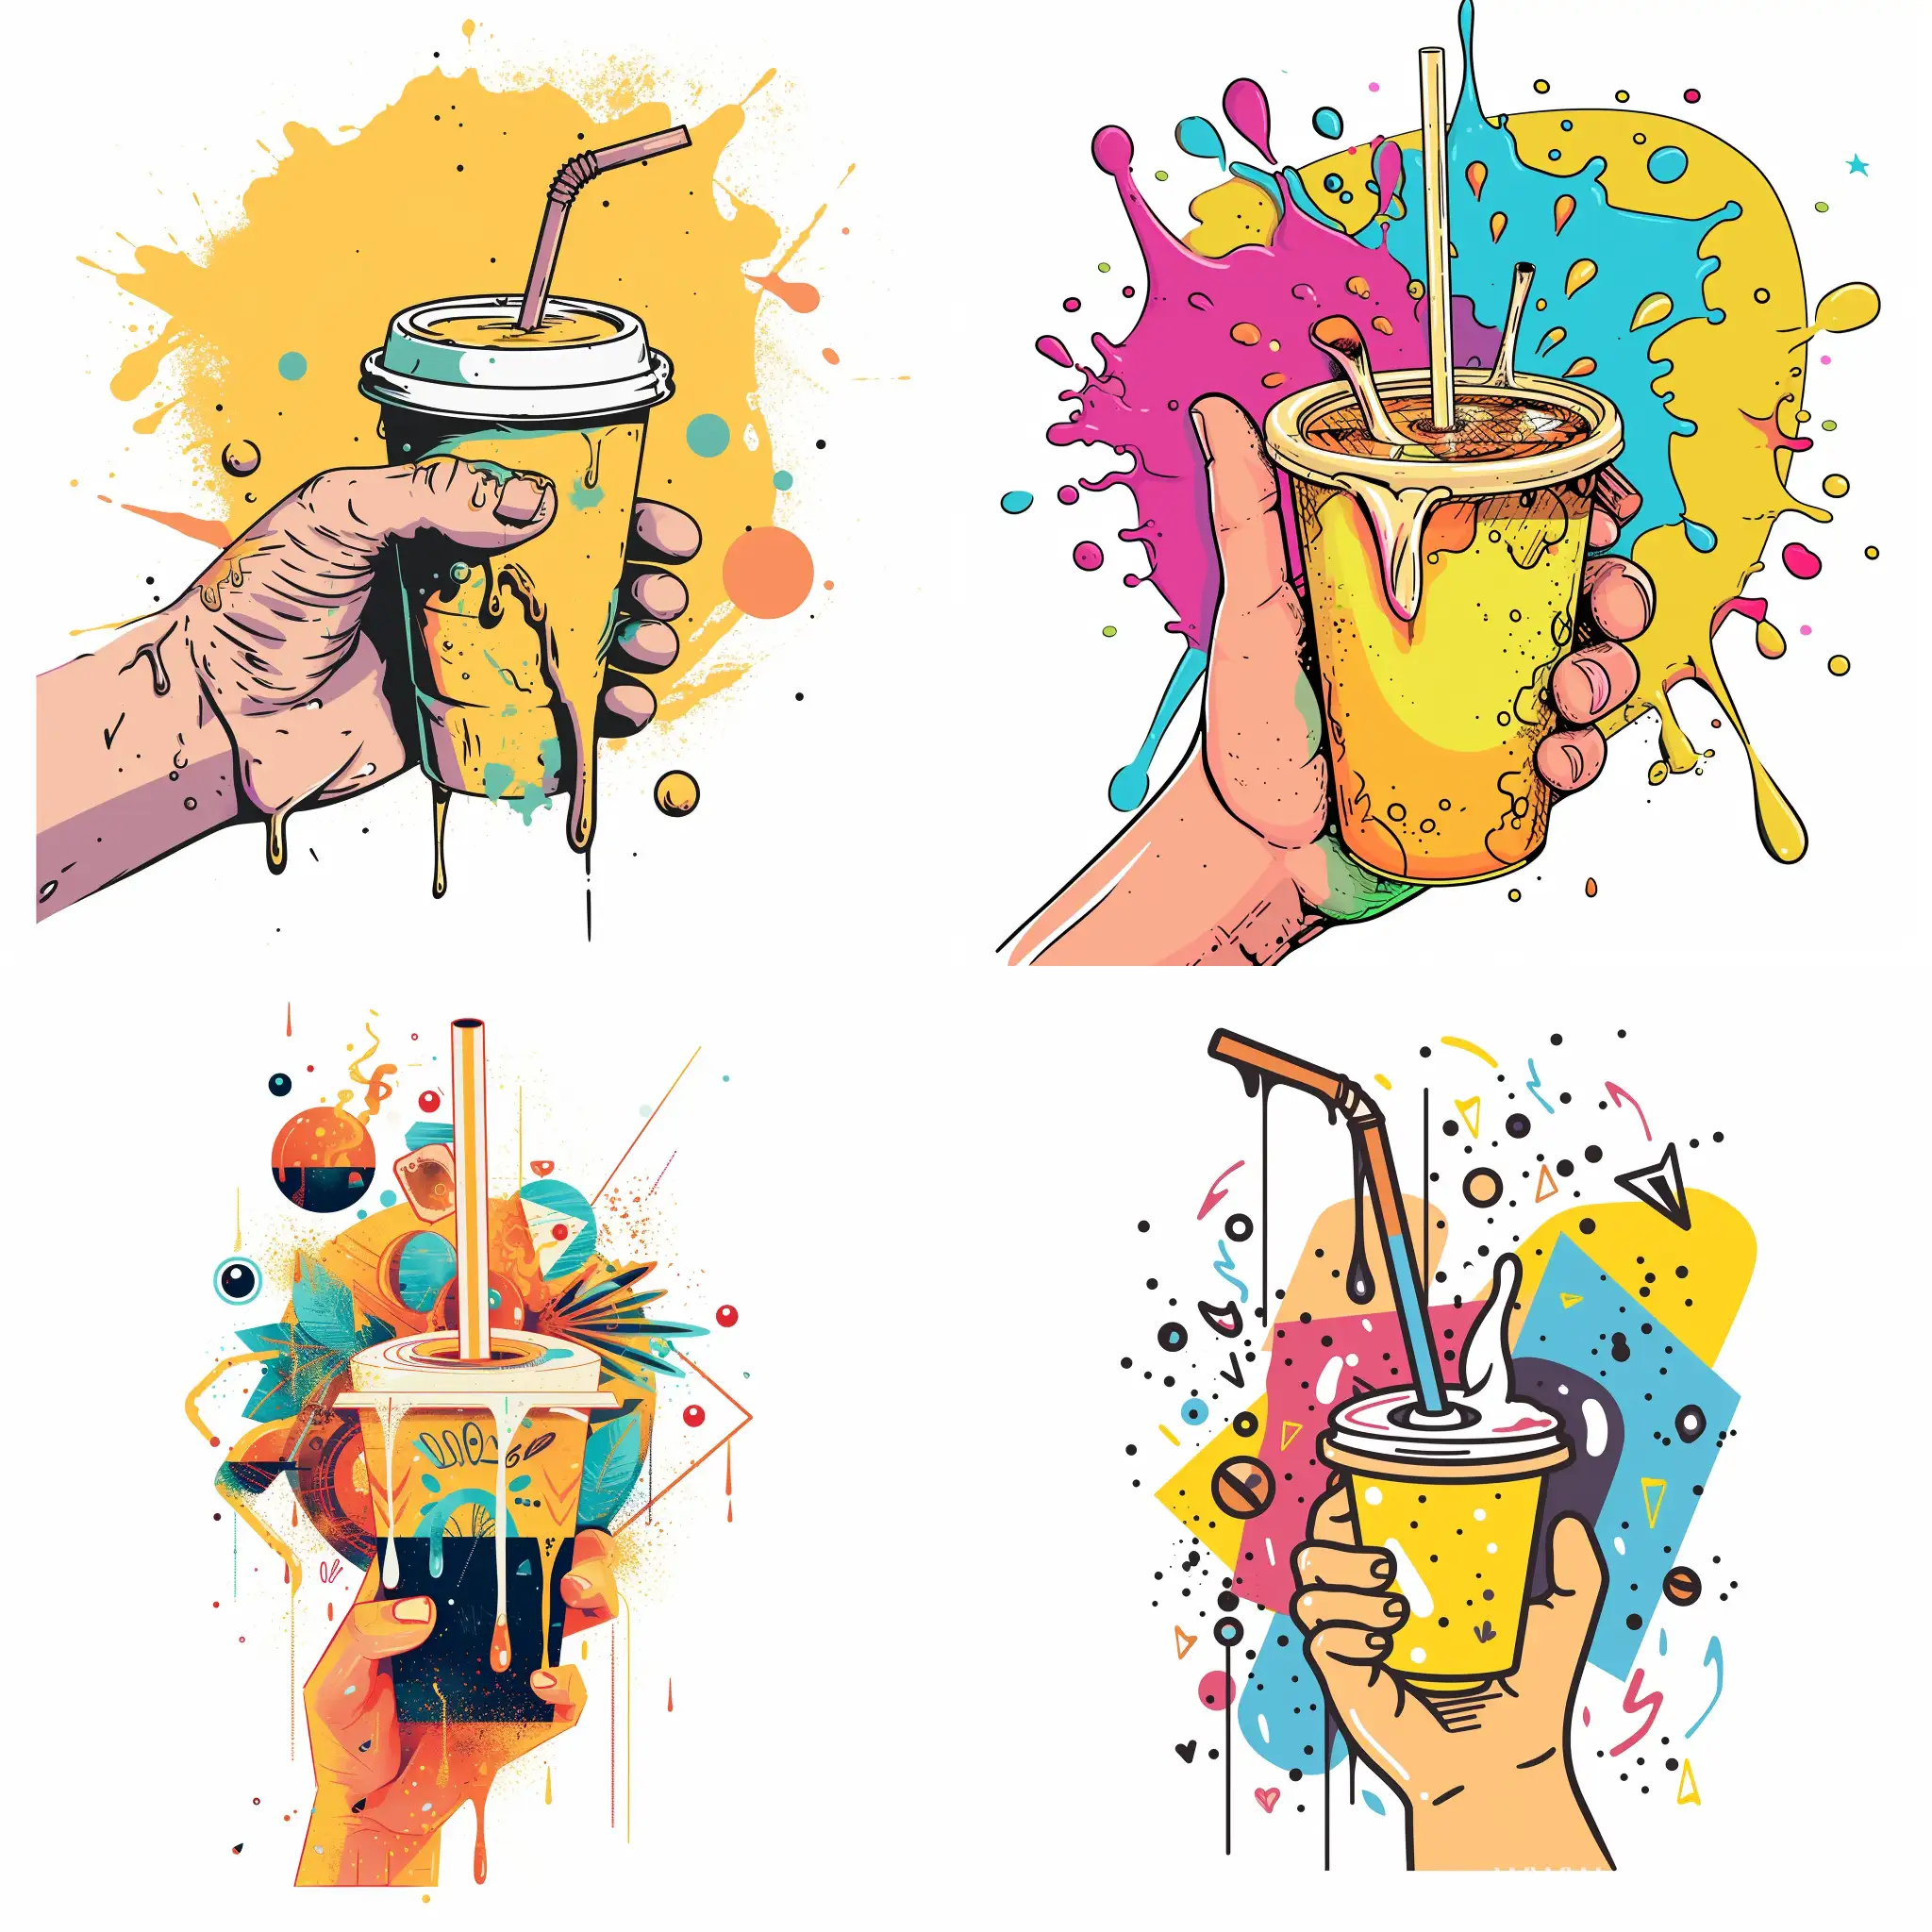 Creative-Vector-Illustration-Hand-Holding-Dripping-Cold-Coffee-Cup-with-Straw